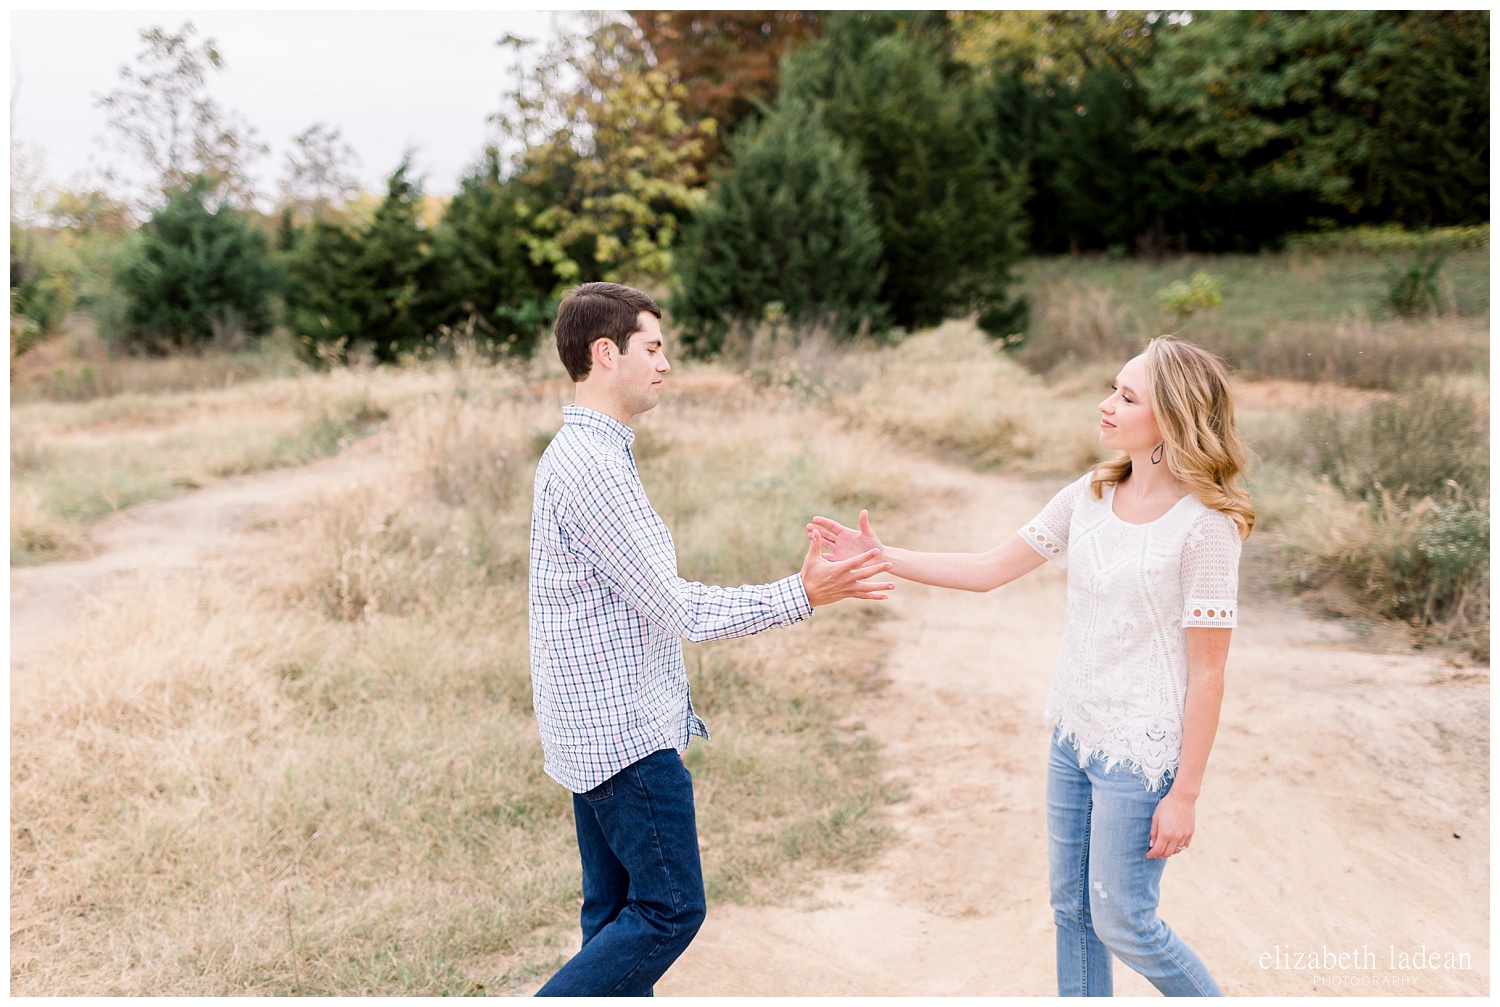 Colorful-Fall-Engagement-Photos-in-KC-C+B-2018-elizabeth-ladean-photography-photo_1788.jpg